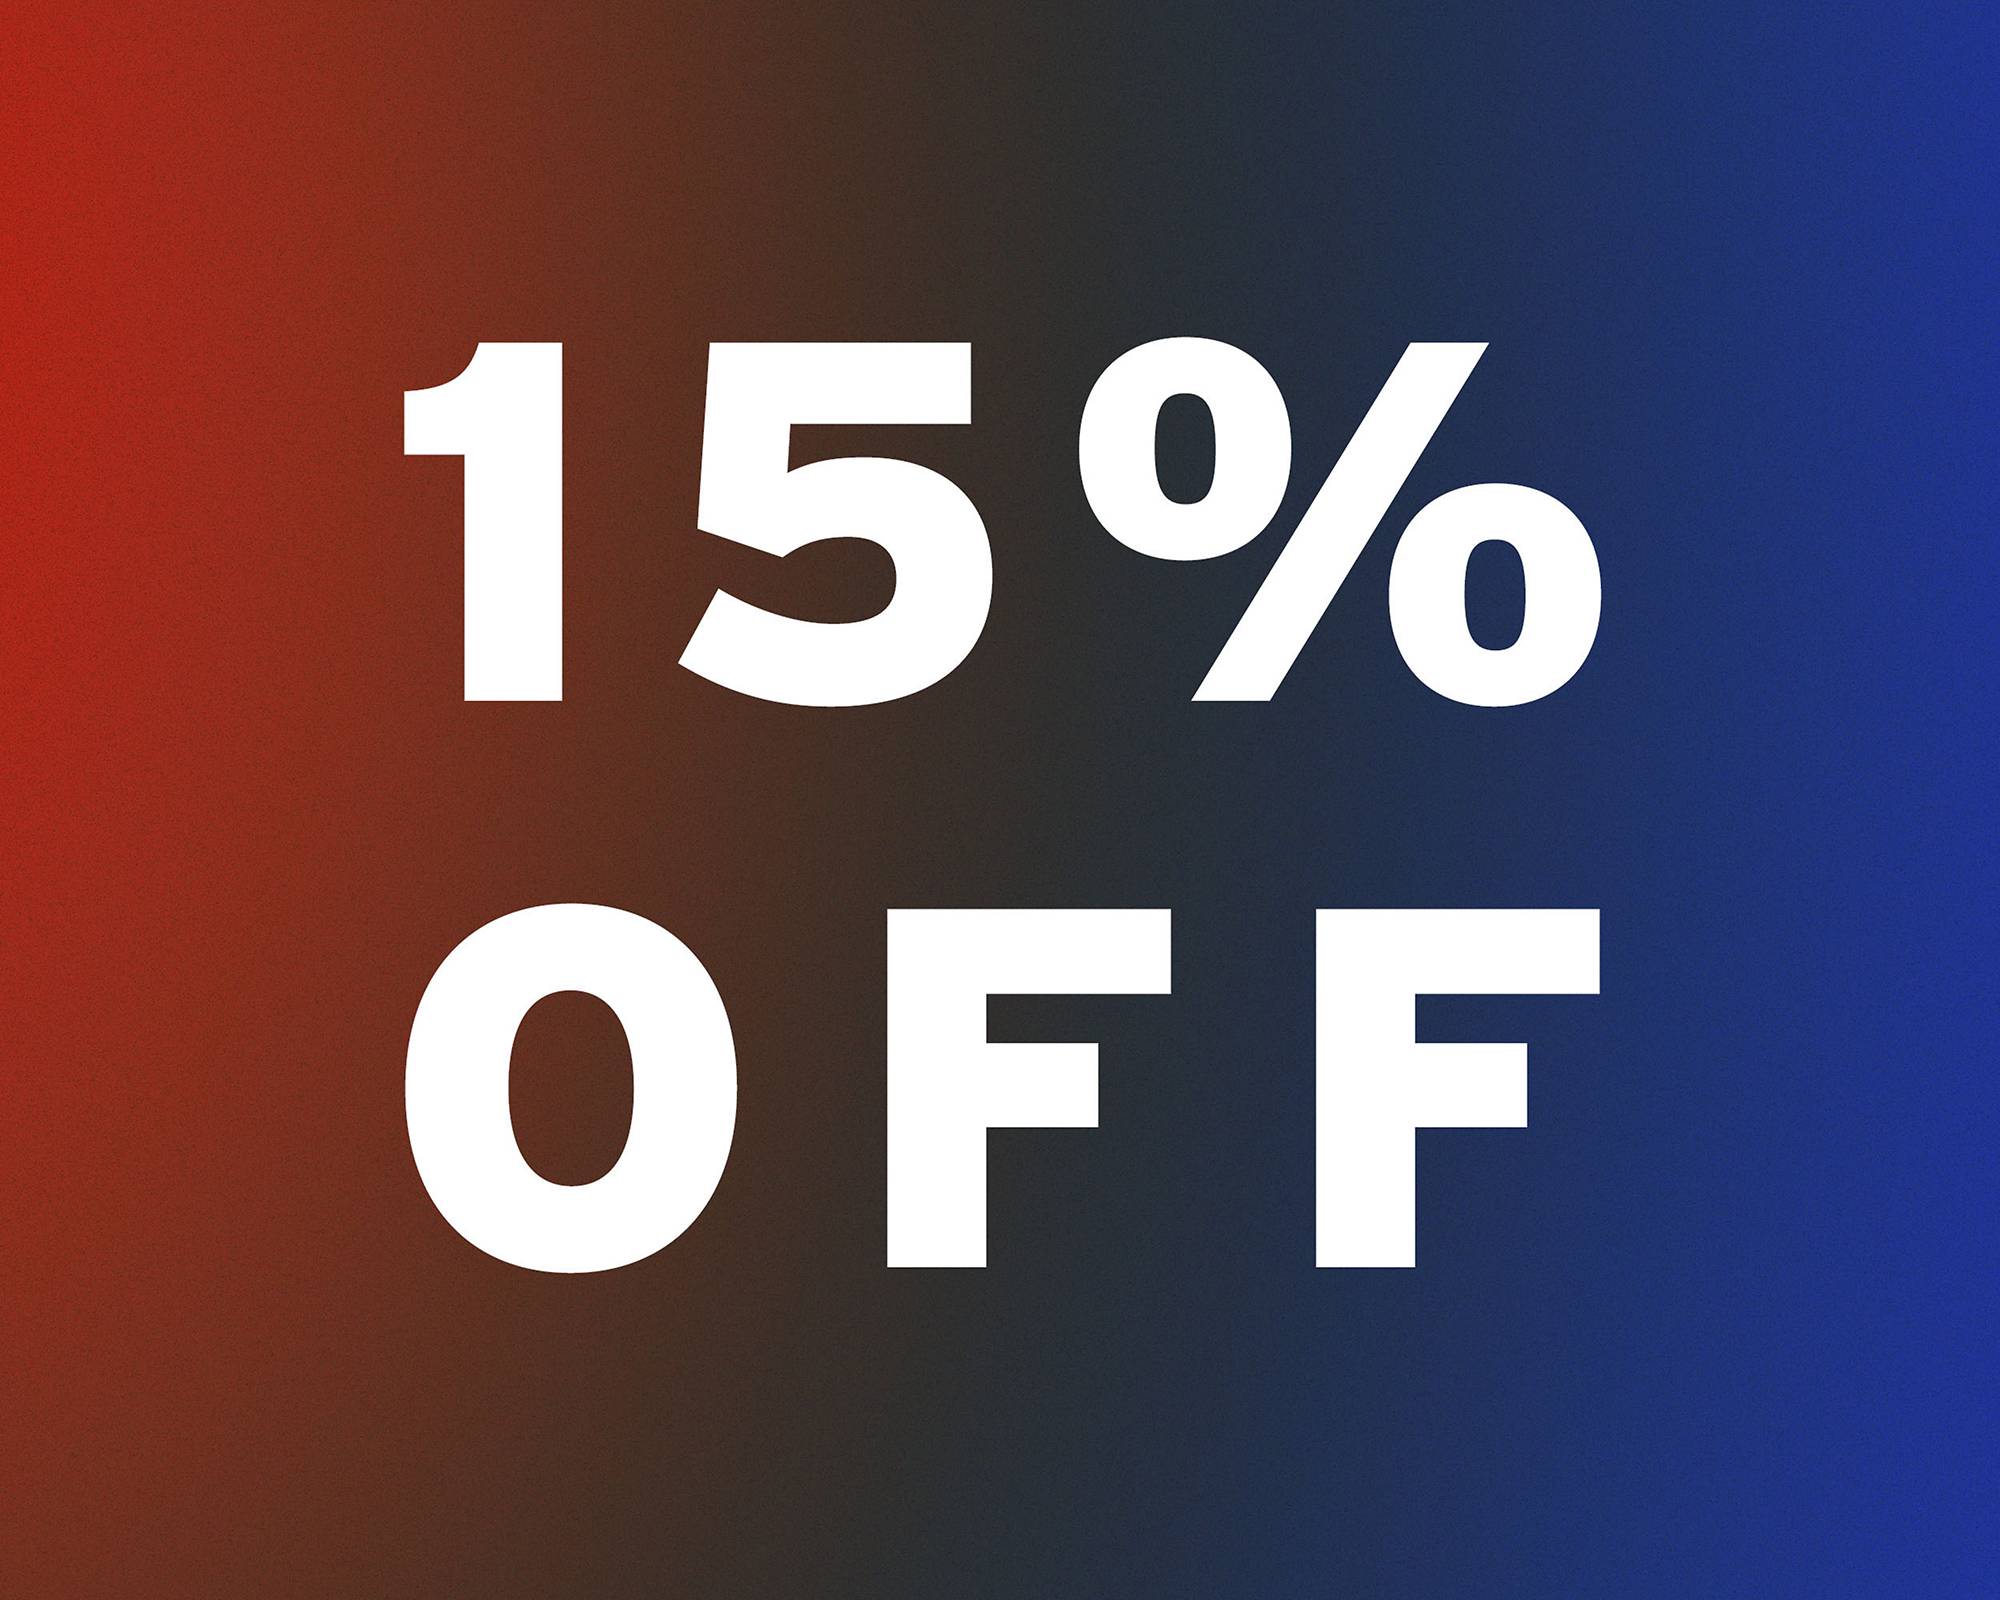 Red, black and blue gradient texture plate with white "15% OFF" text treatment on top